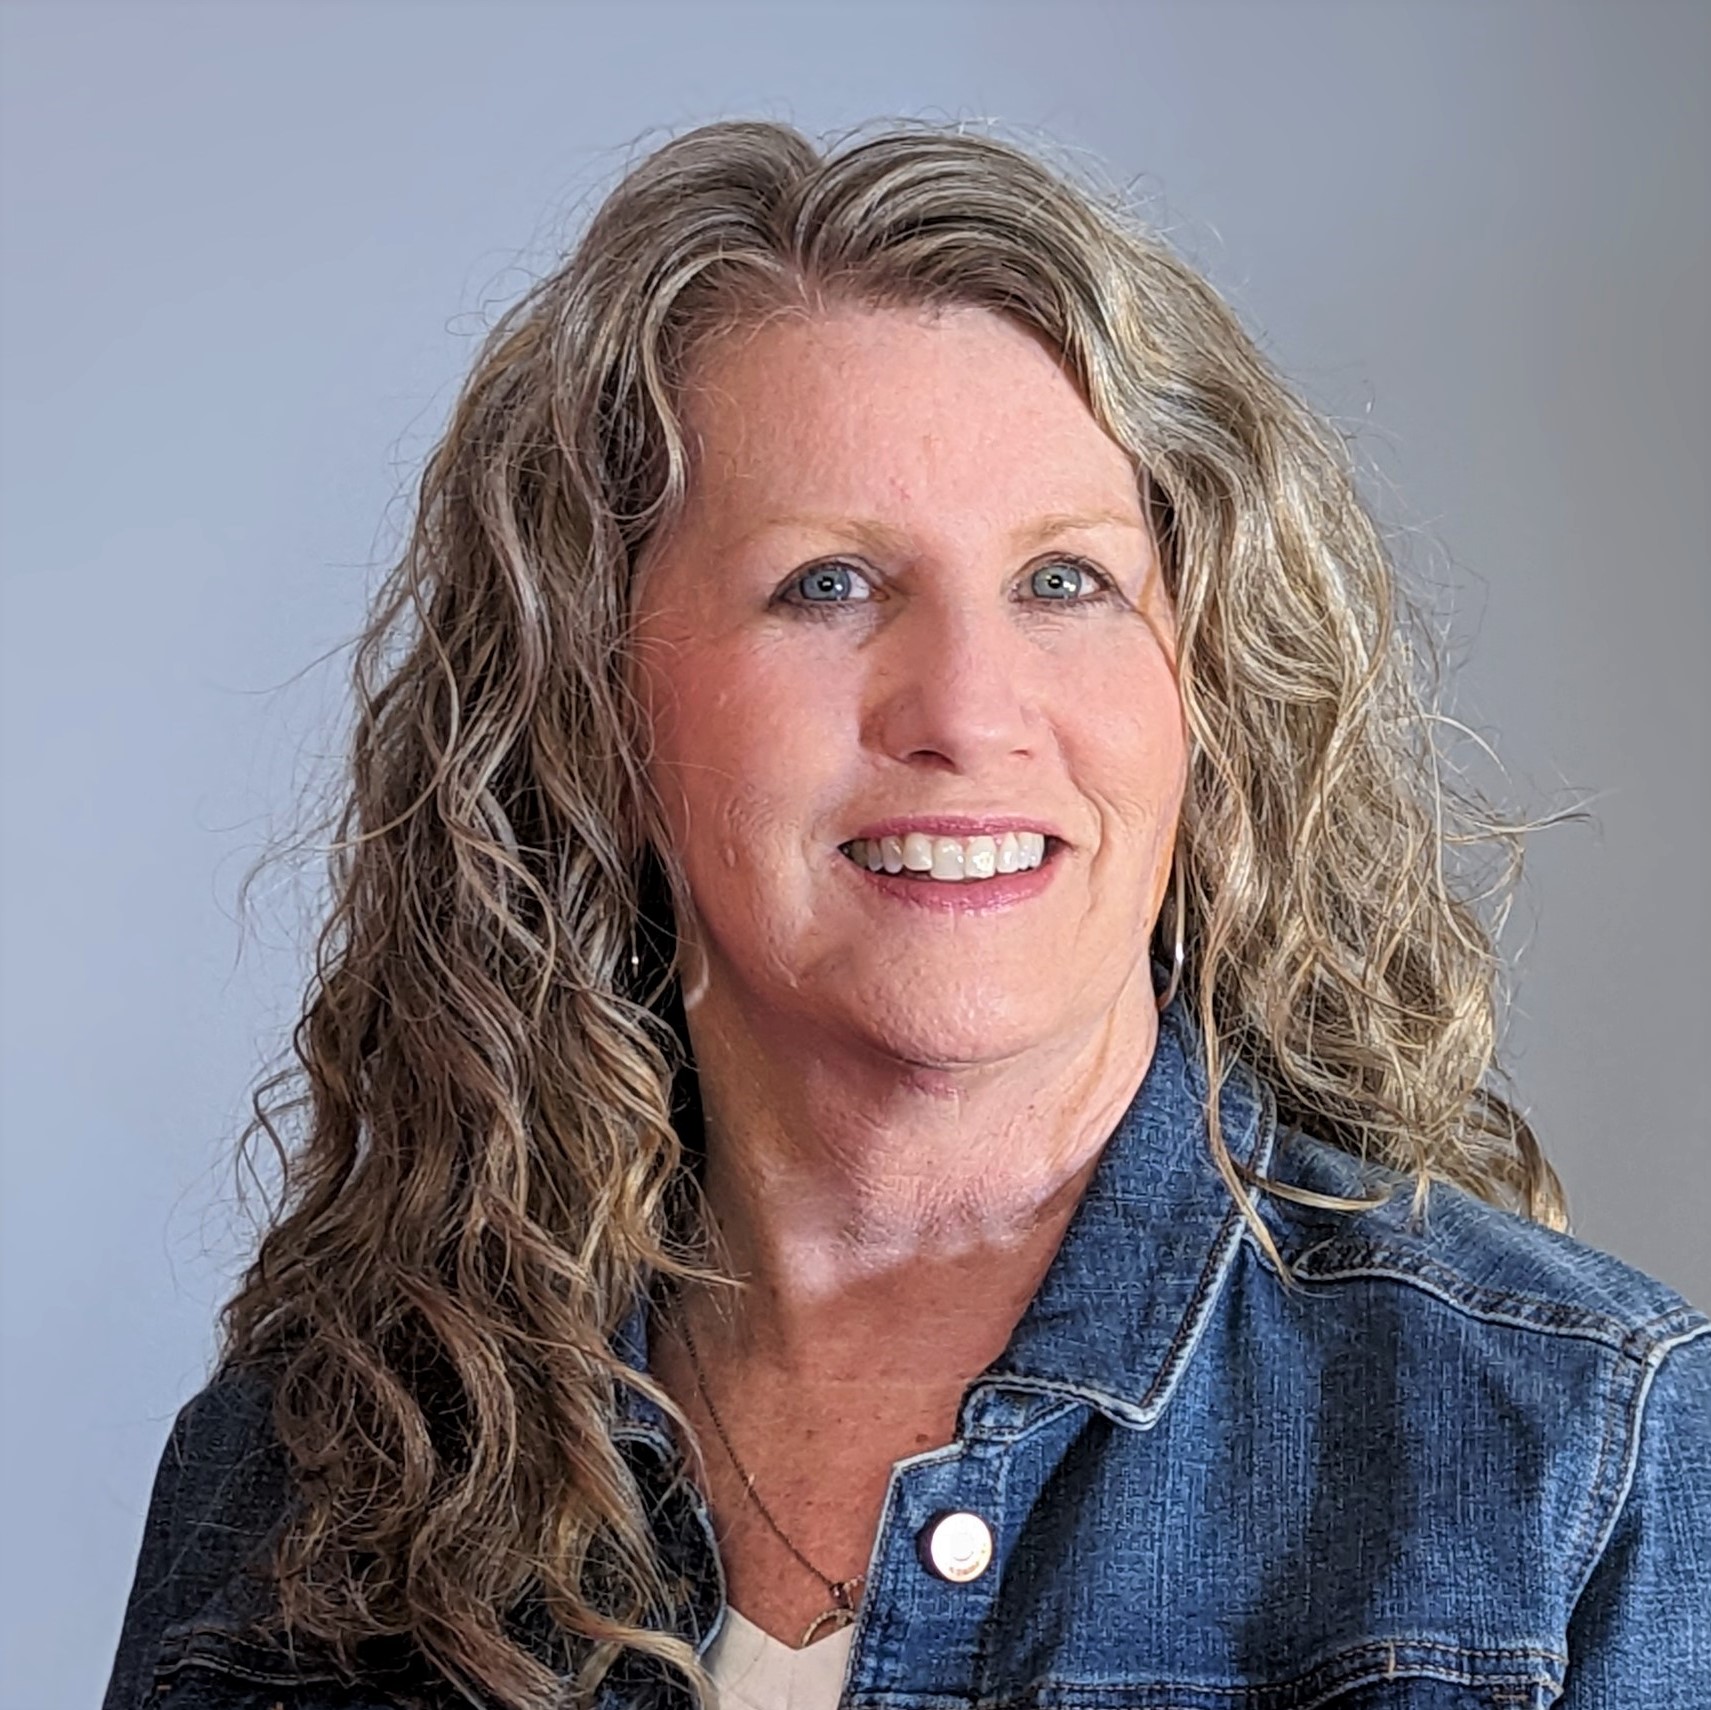 Tina Tharp is a White woman with long curly hair. She is wearing a denim jacket and smiling at the camera.